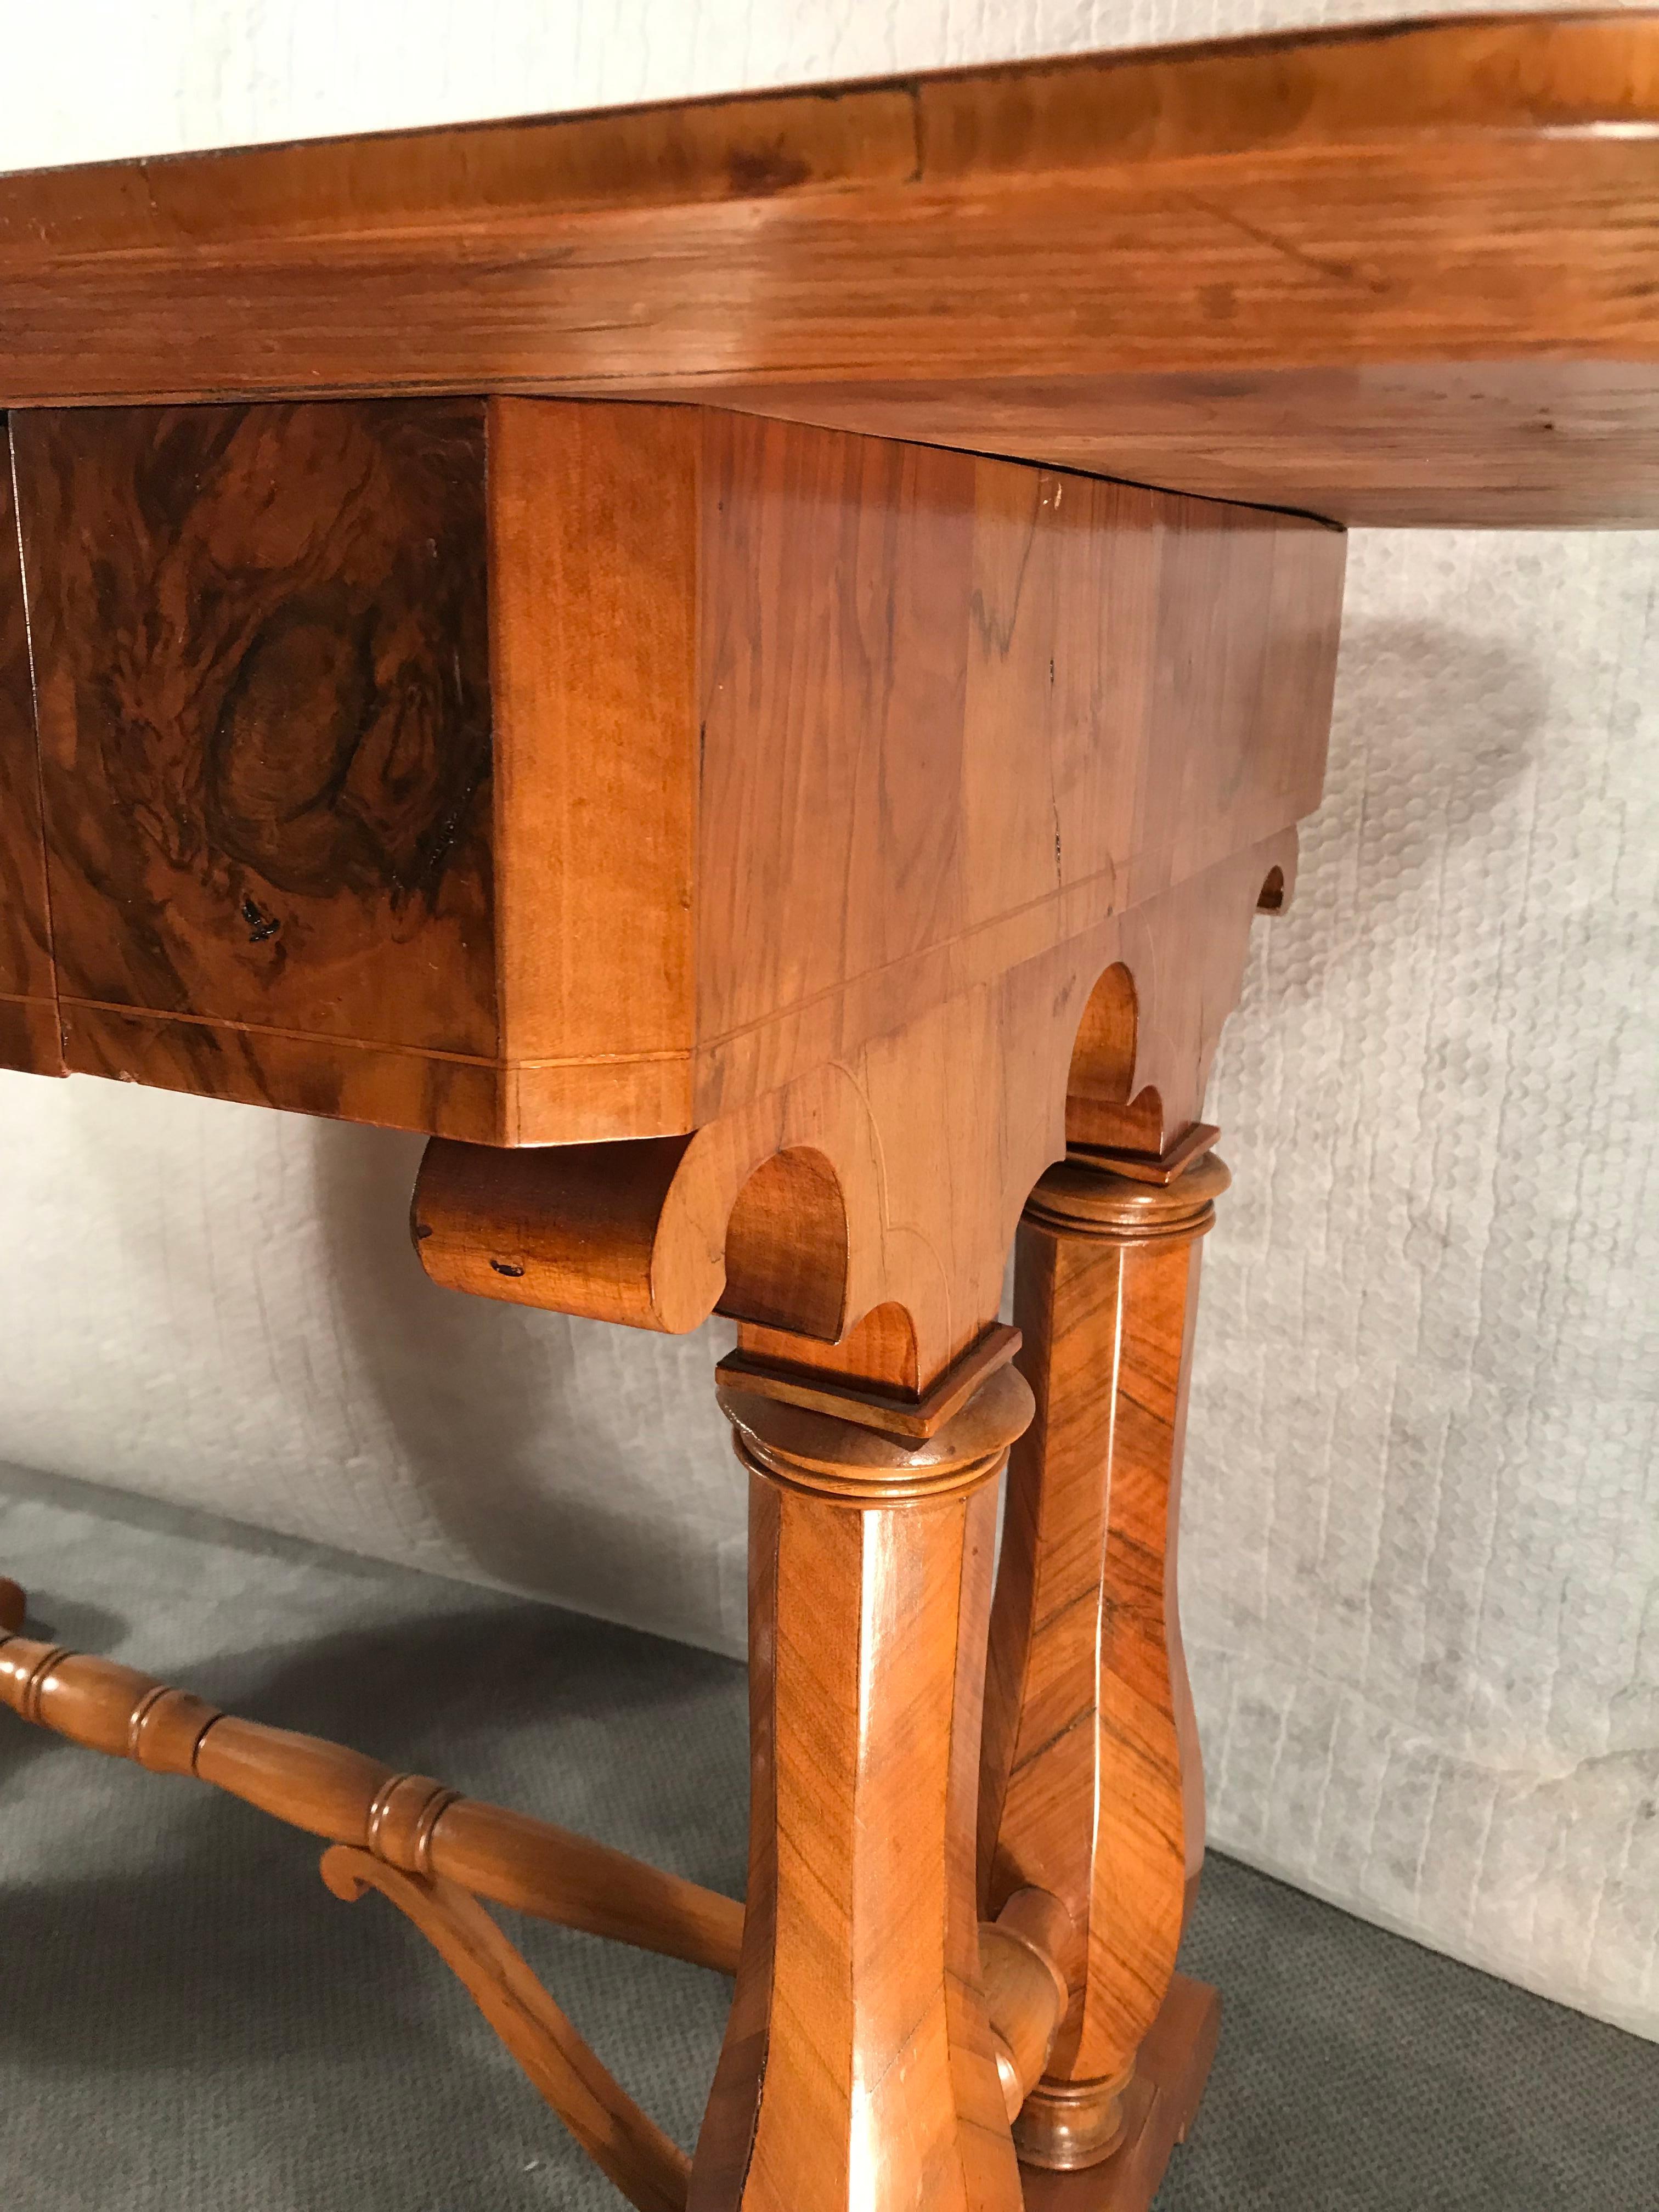 Beautiful writing desk, Vienna 1810-20, in the style of Josef Danhauser, walnut veneer. The design of this table shows the influence of the famous Austrian Biedermeier furniture designer Josef Danhauser (1780-1829). Danhauser was the leading